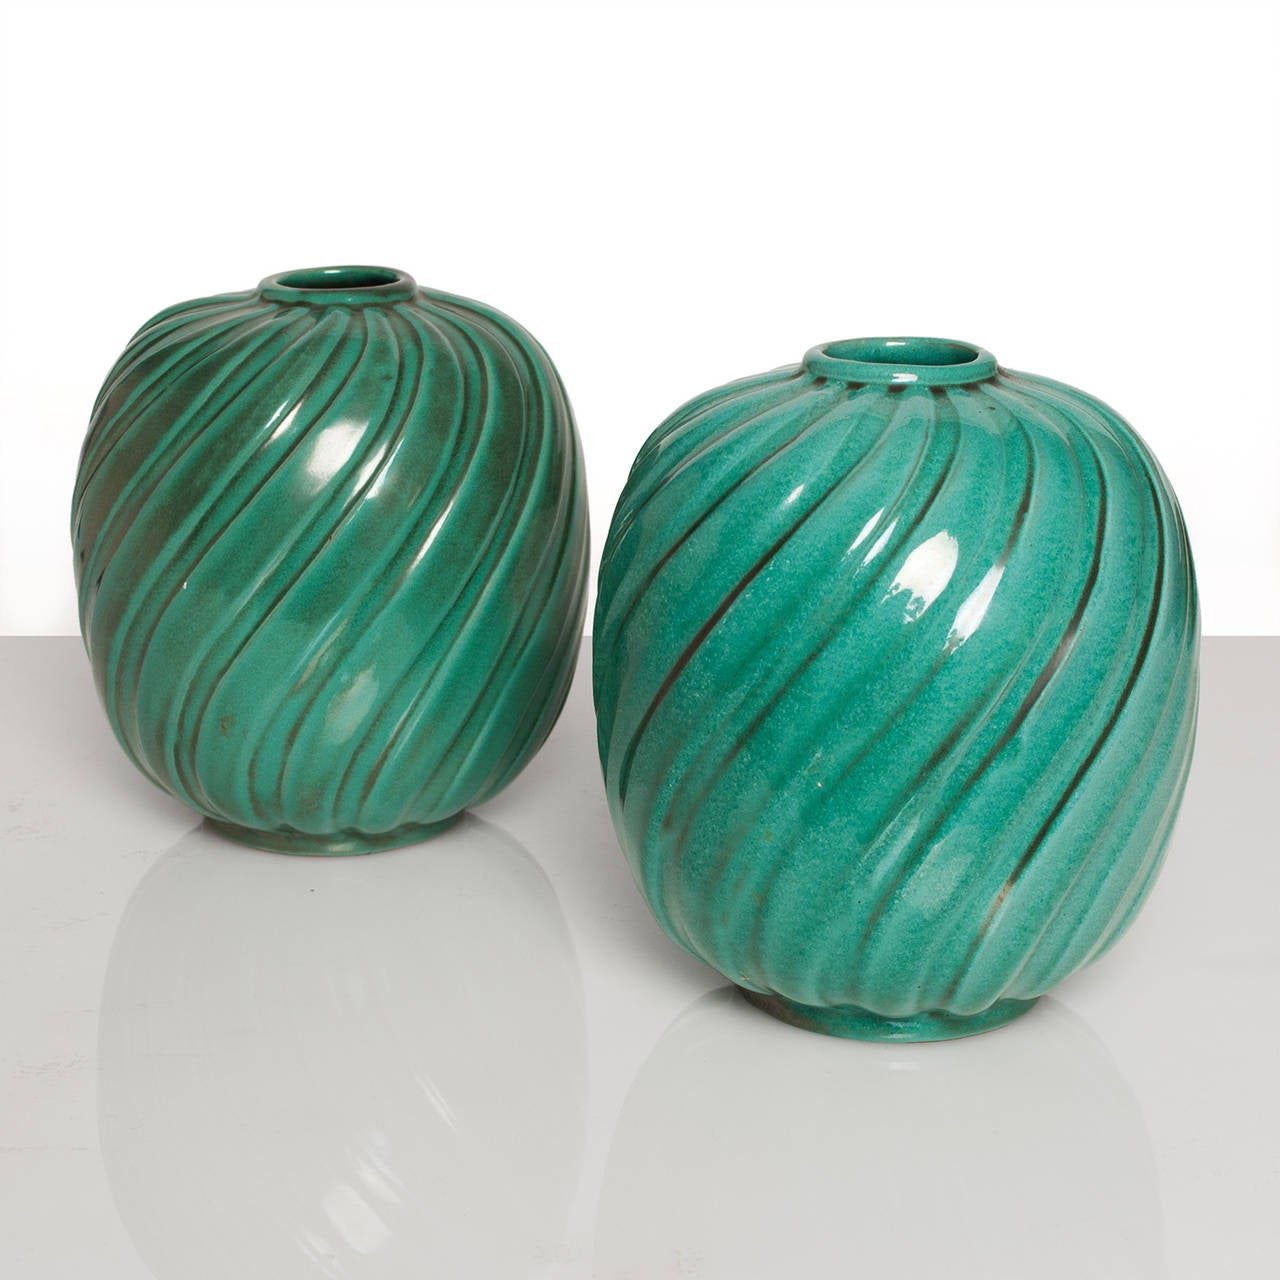 Pair of Scandinavian Modern vases designed by Anna-Lisa Thomson with copper oxide glaze. Made by Upsala Ekeby, circa 1930s. Other pieces available.